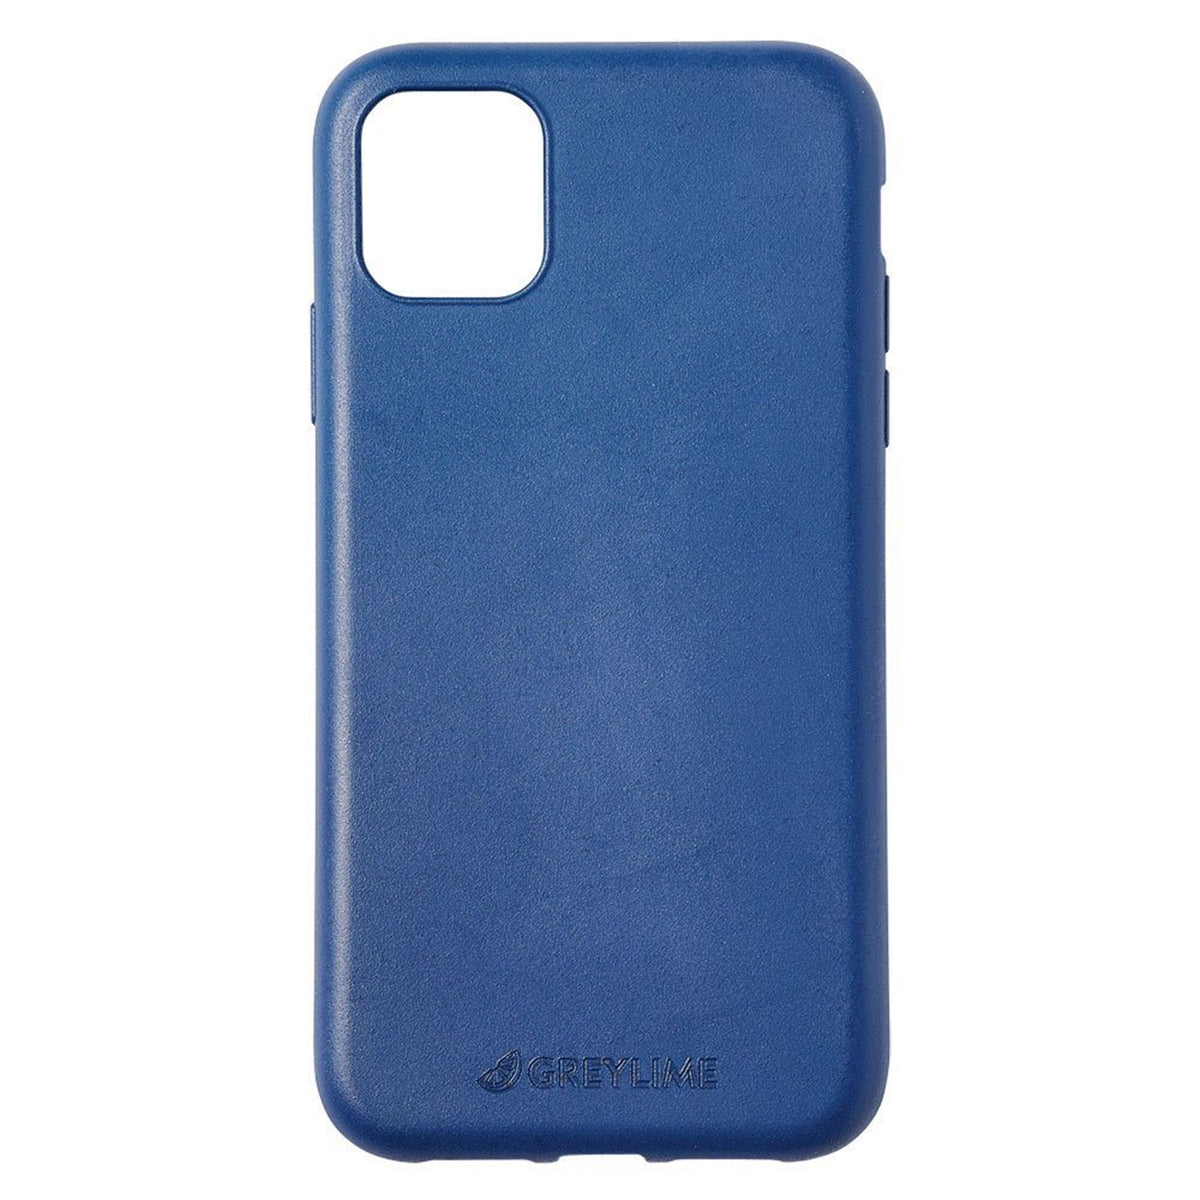 GreyLime-iPhone-11-biodegradable-cover-Navy-blue-COIP1103-V4.jpg